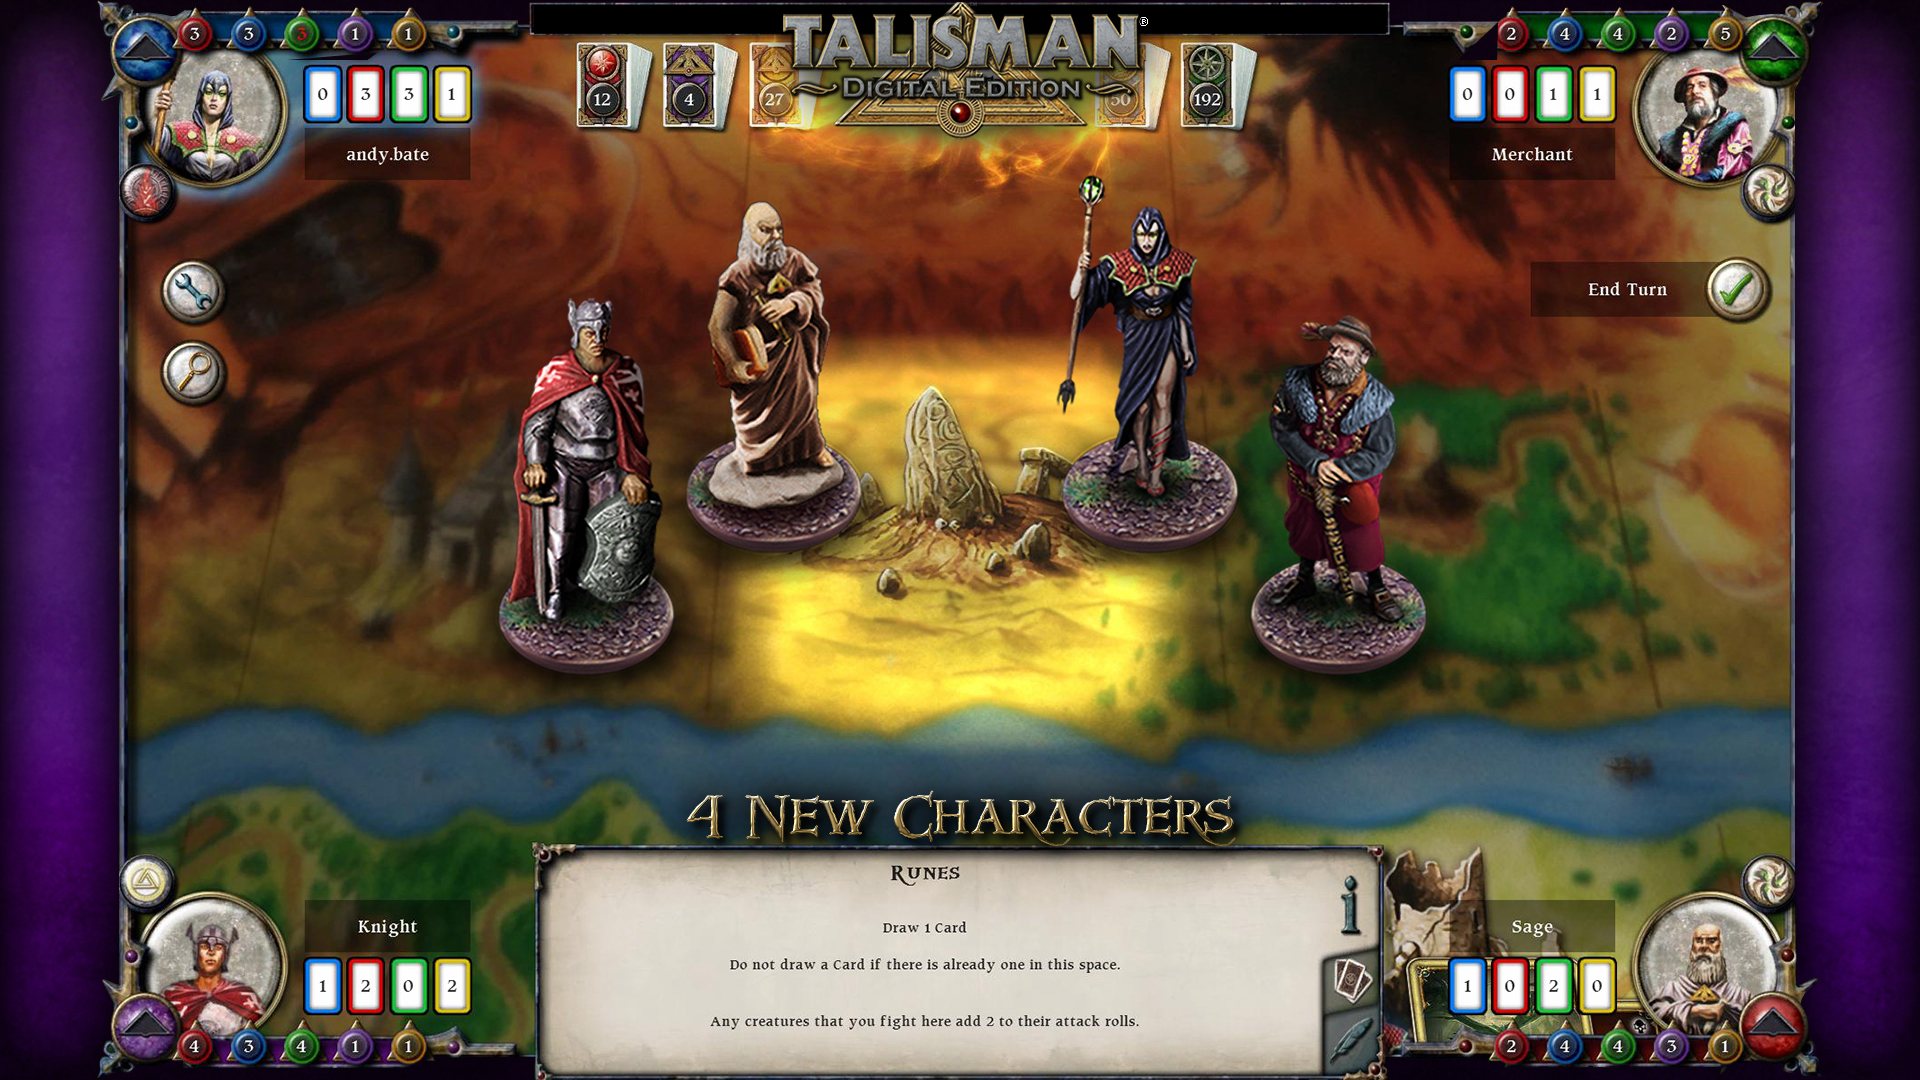 Talisman - The Reaper Expansion Pack DLC Steam CD Key 6.77 USD